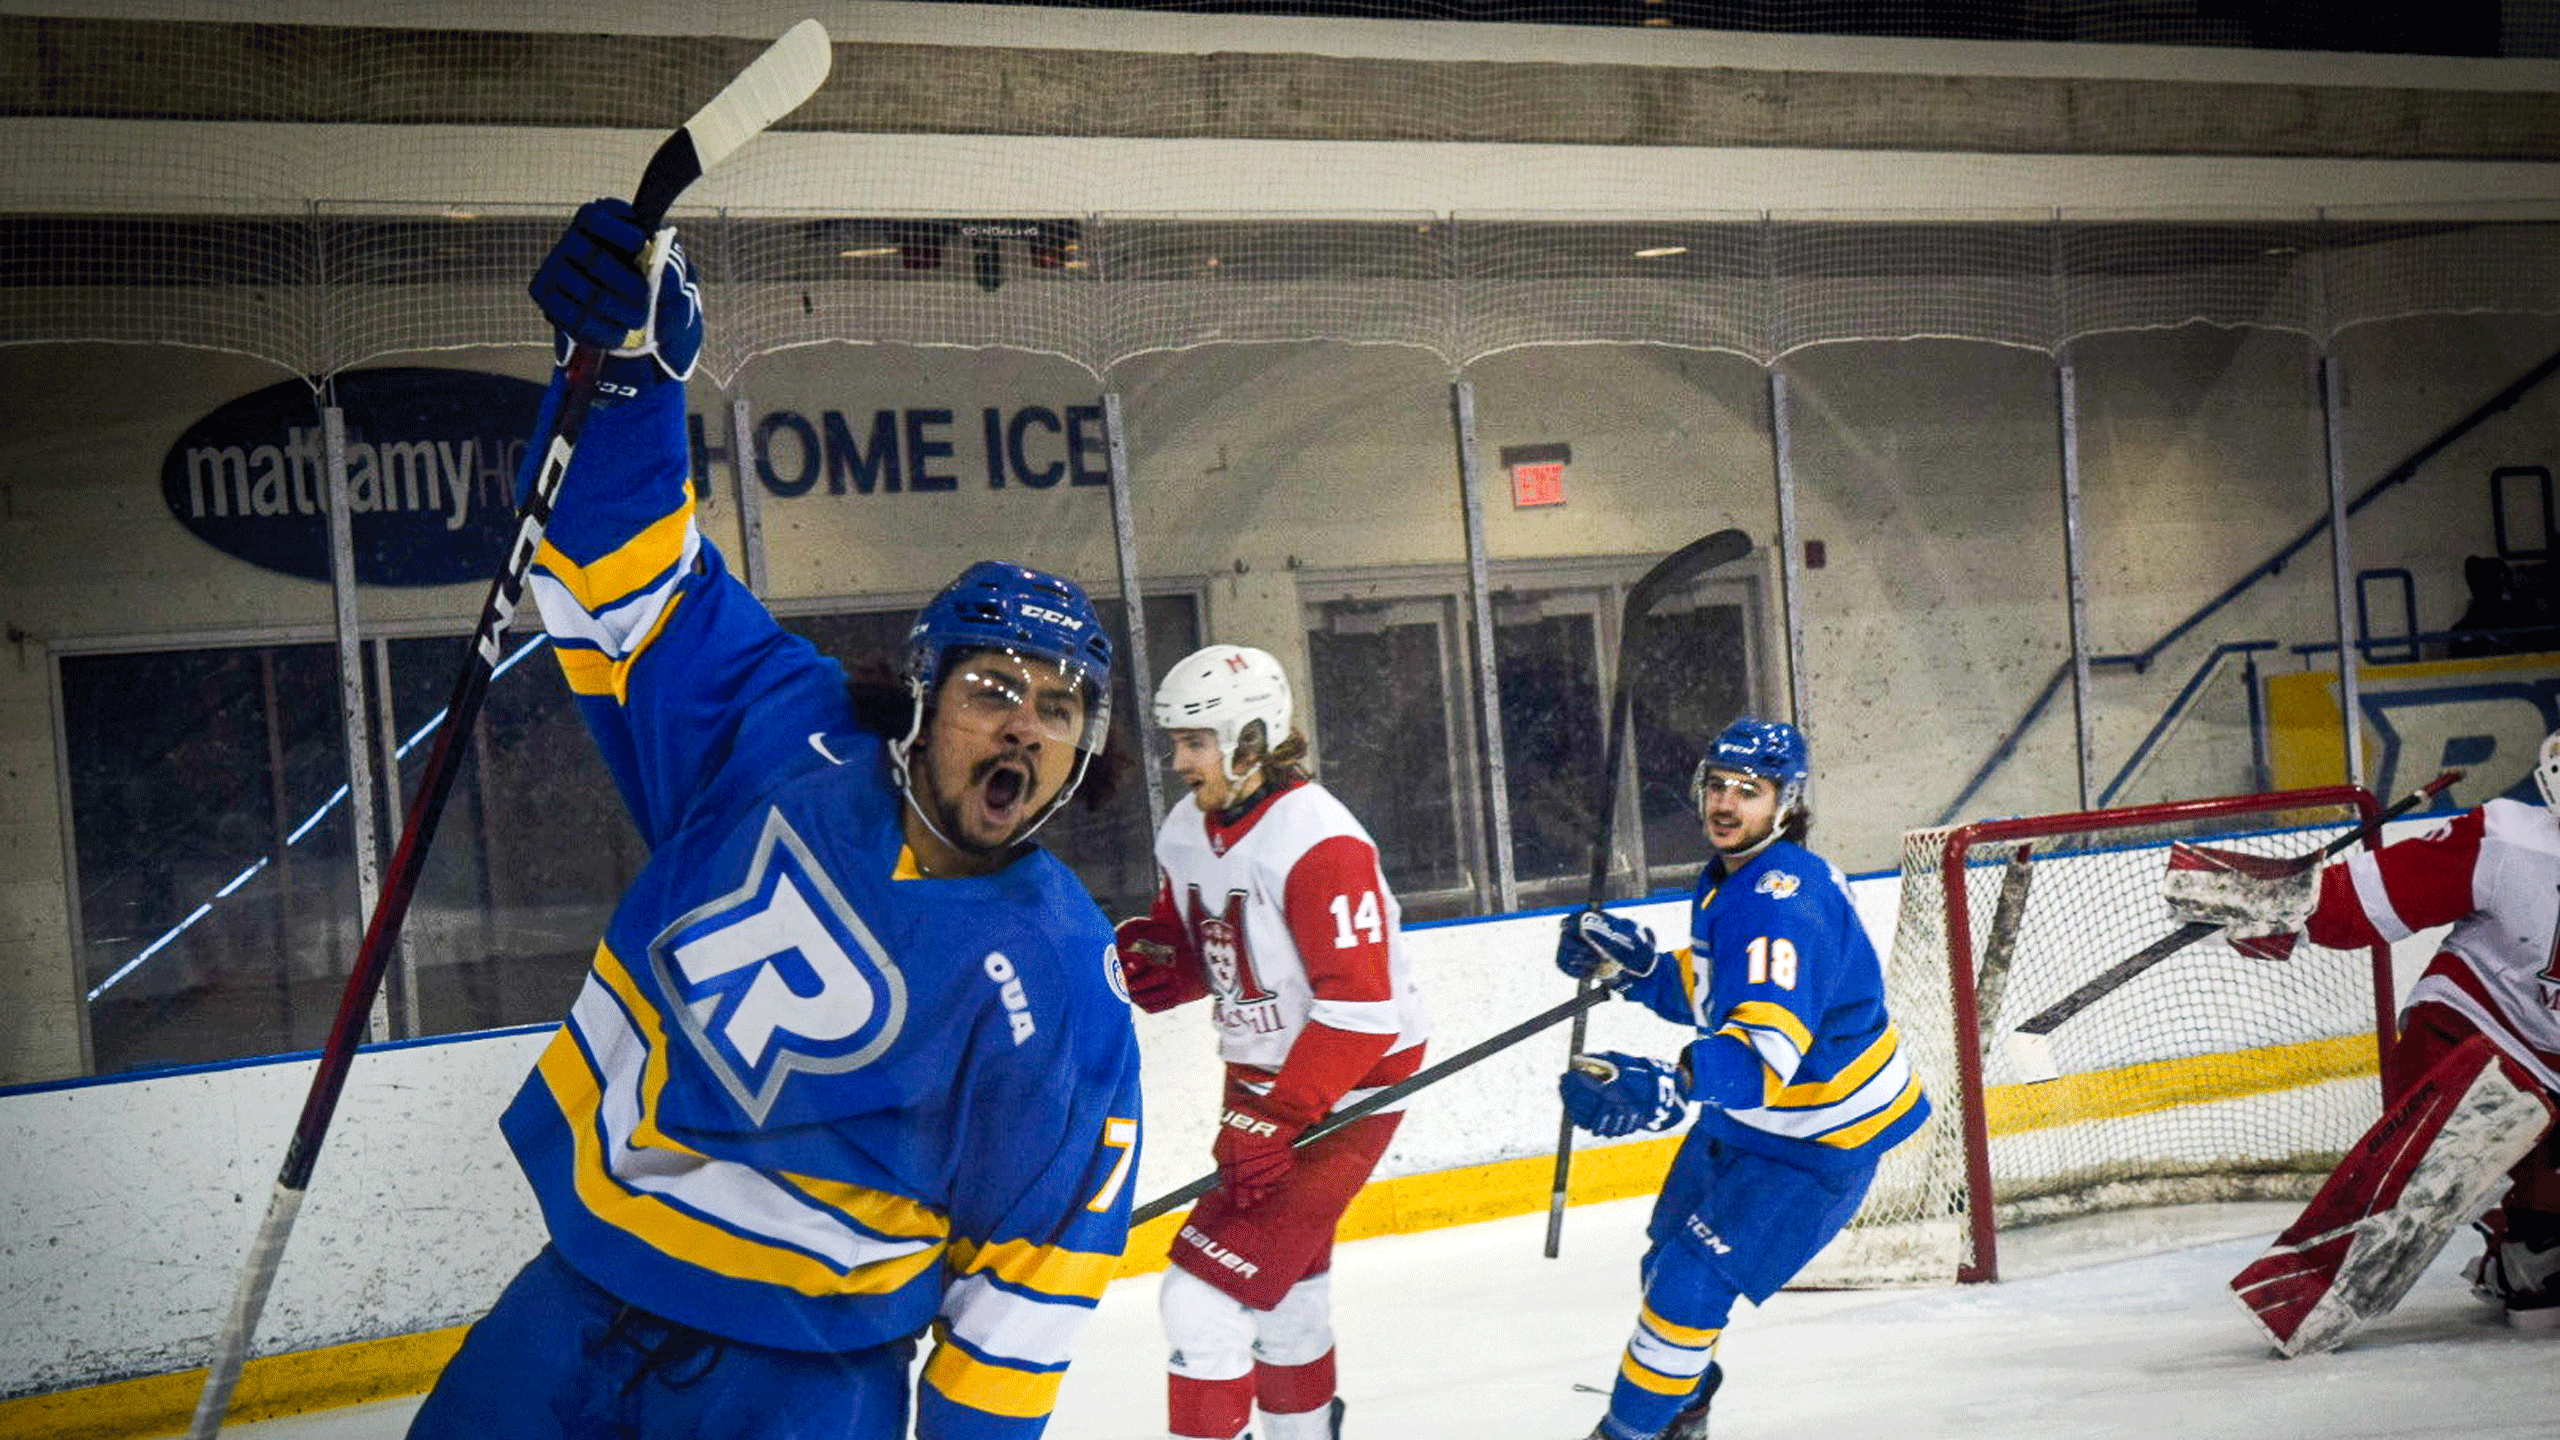 A Rams men's hockey player in a blue jersey celebrates a goal